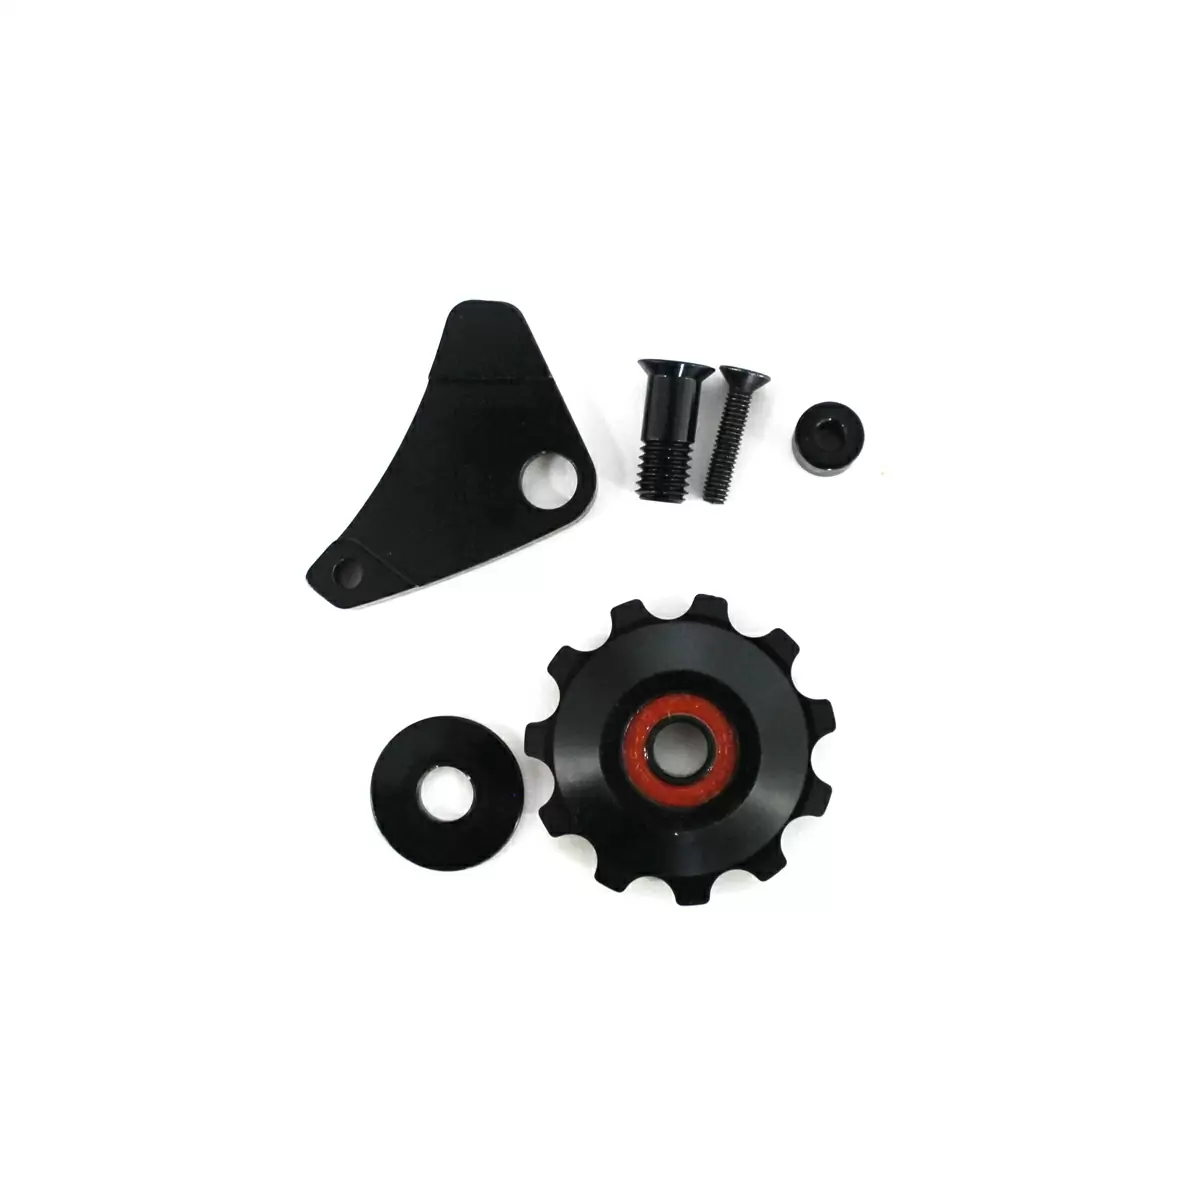 Lower Chain Guide Kit for Powerplay Models - image